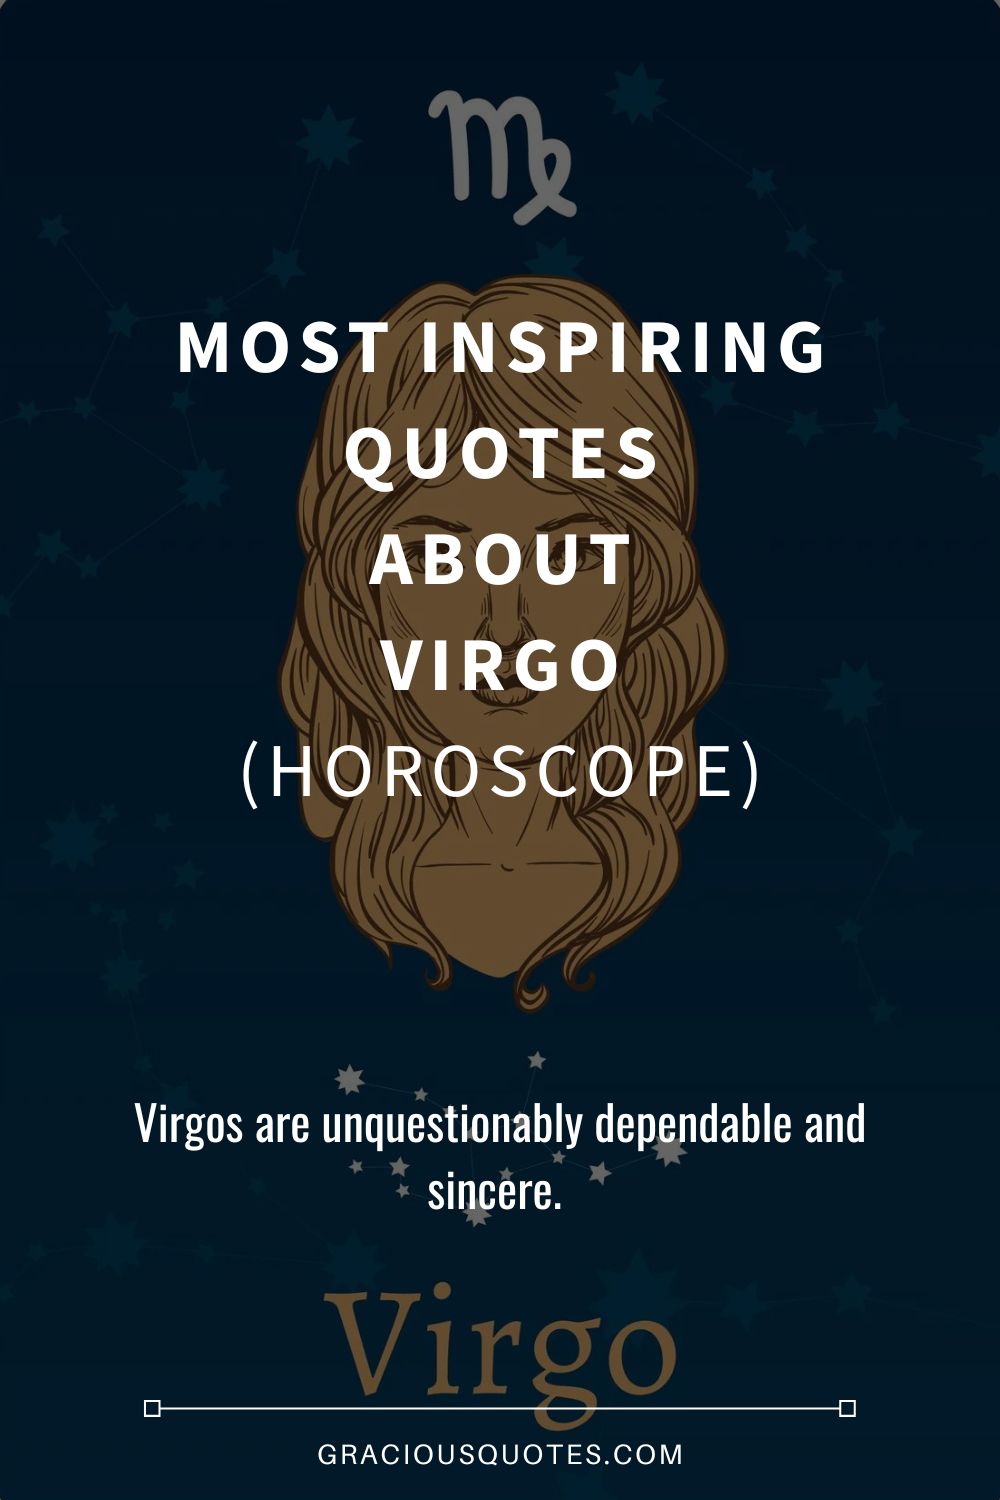 Most Inspiring Quotes About Virgo (HOROSCOPE) - Gracious Quotes